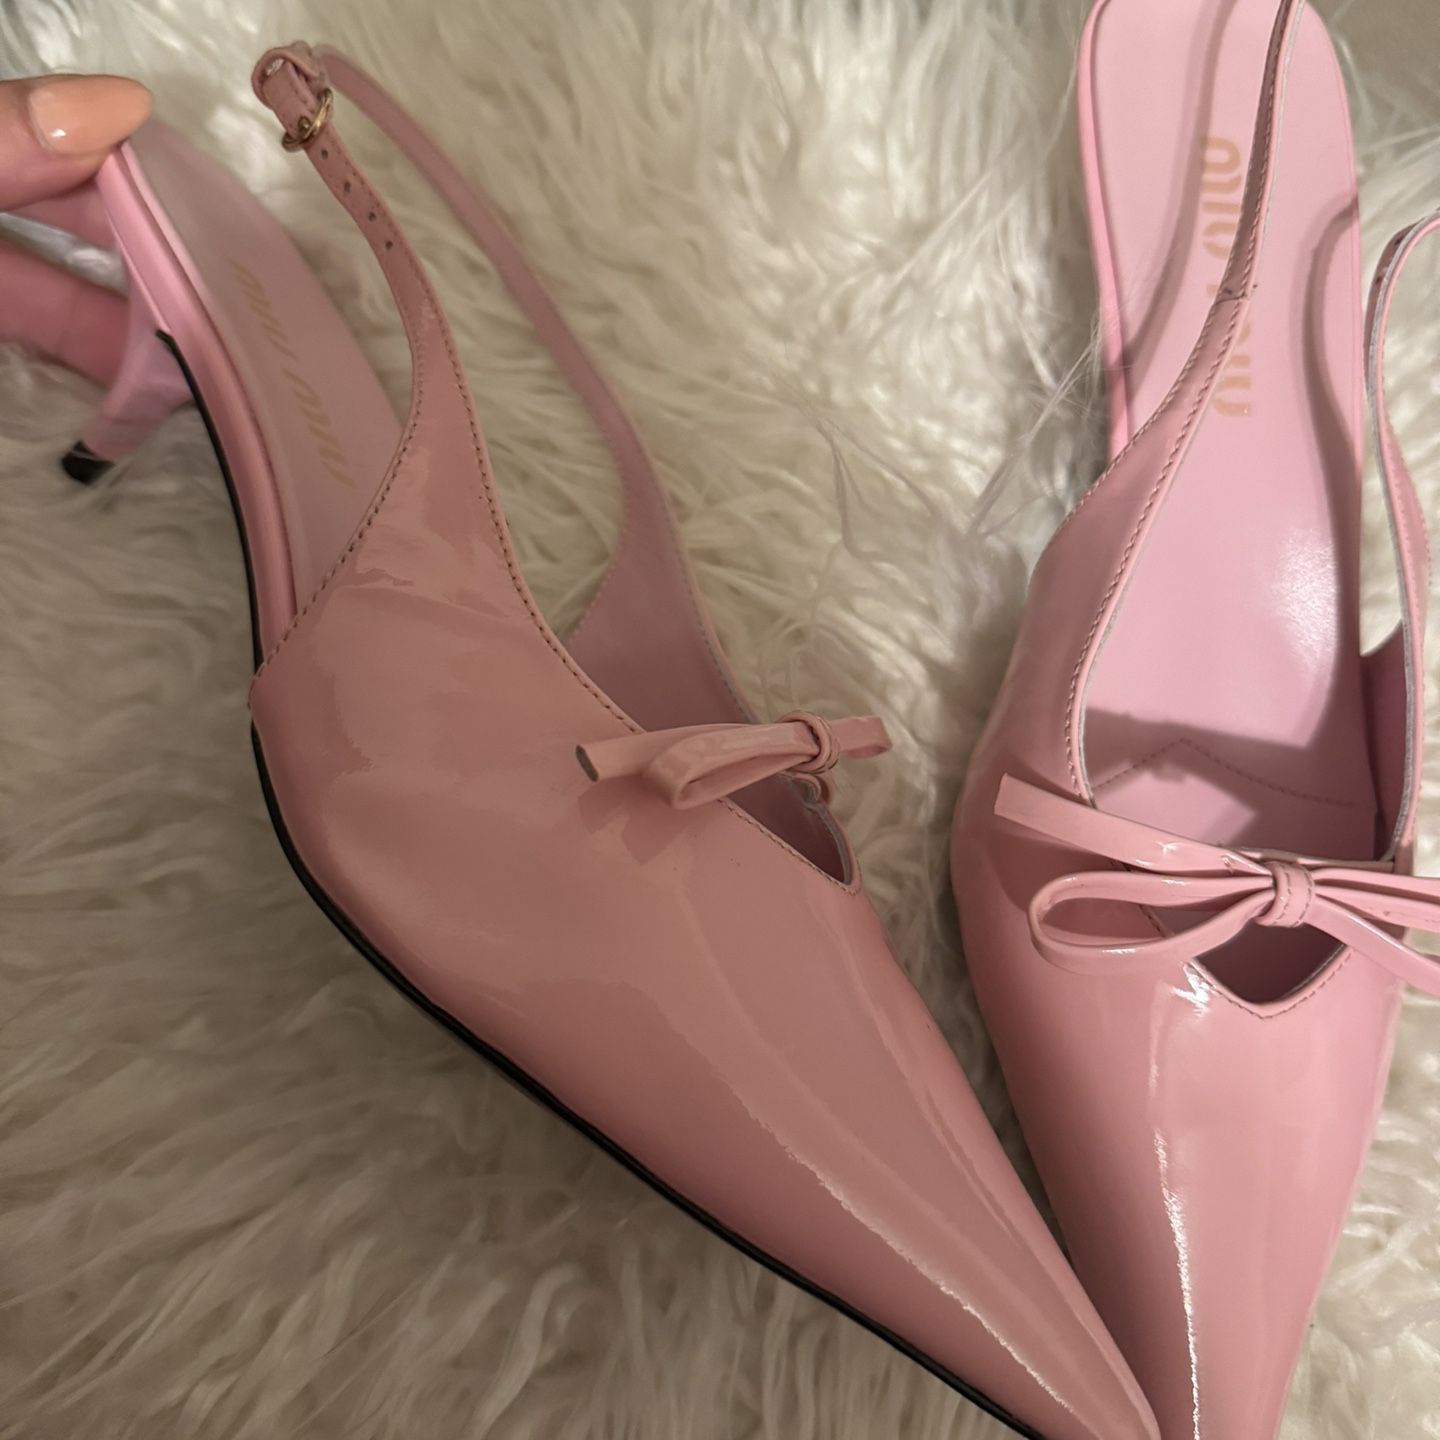 Top quality Brand New Pink cute Heels